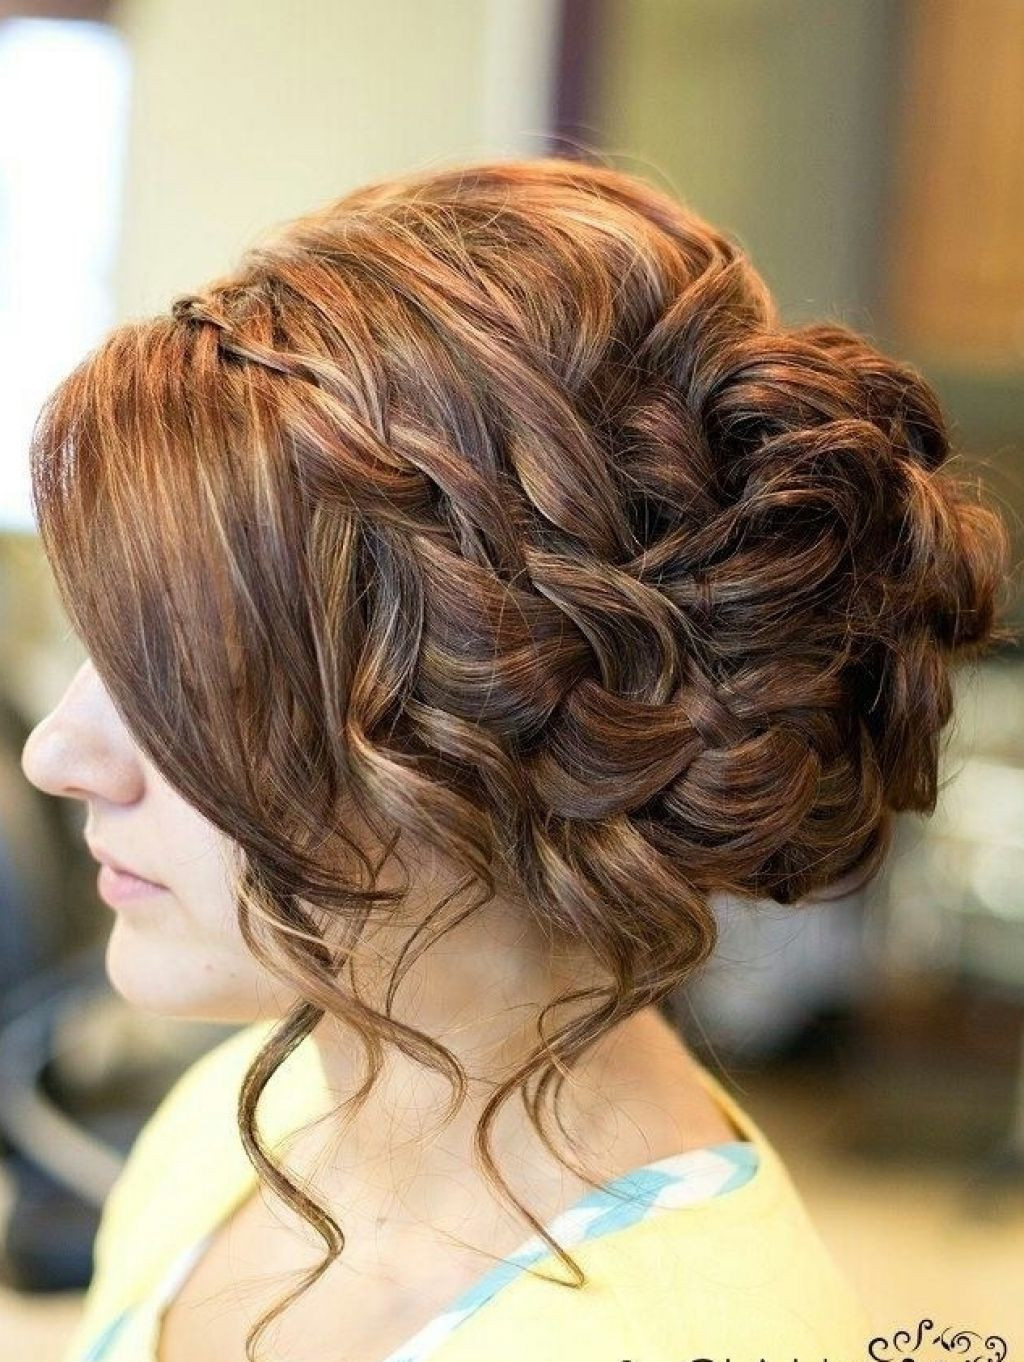 Prom Hairstyle Buns
 14 Prom Hairstyles for Long Hair that are Simply Adorable